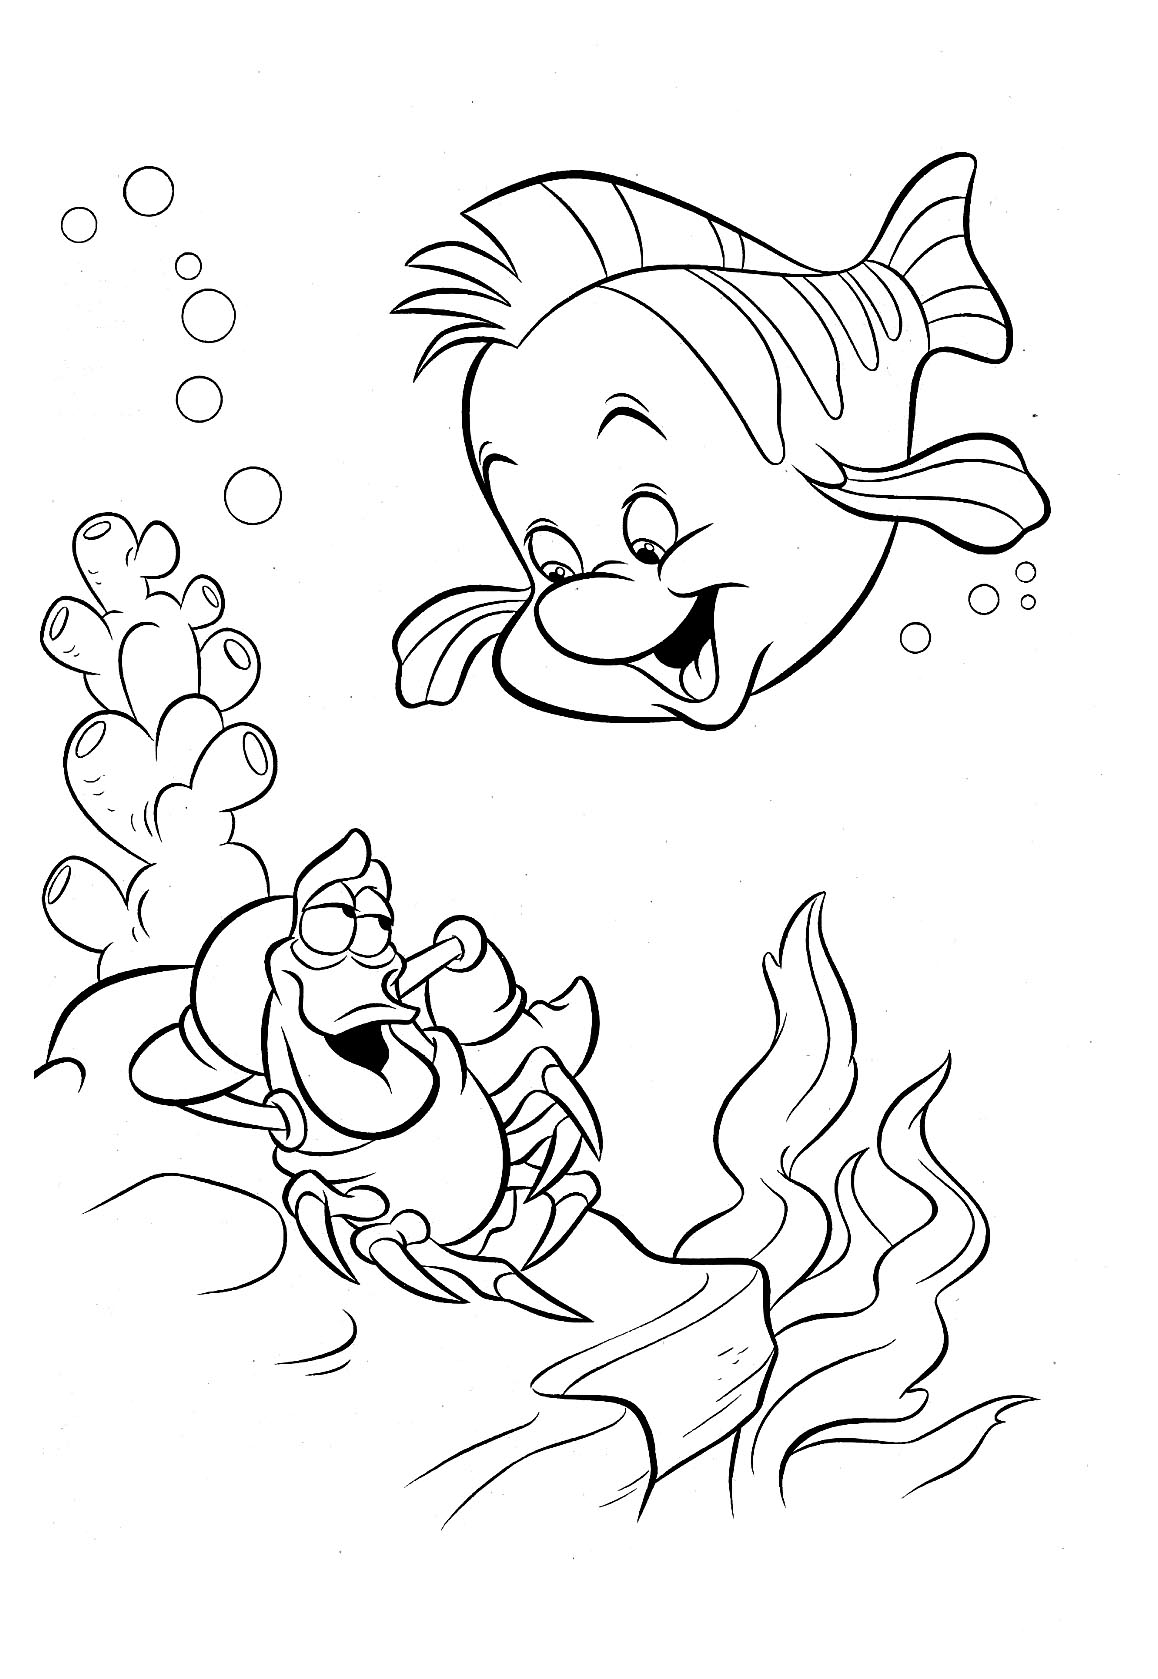 The Little Mermaid coloring page to download